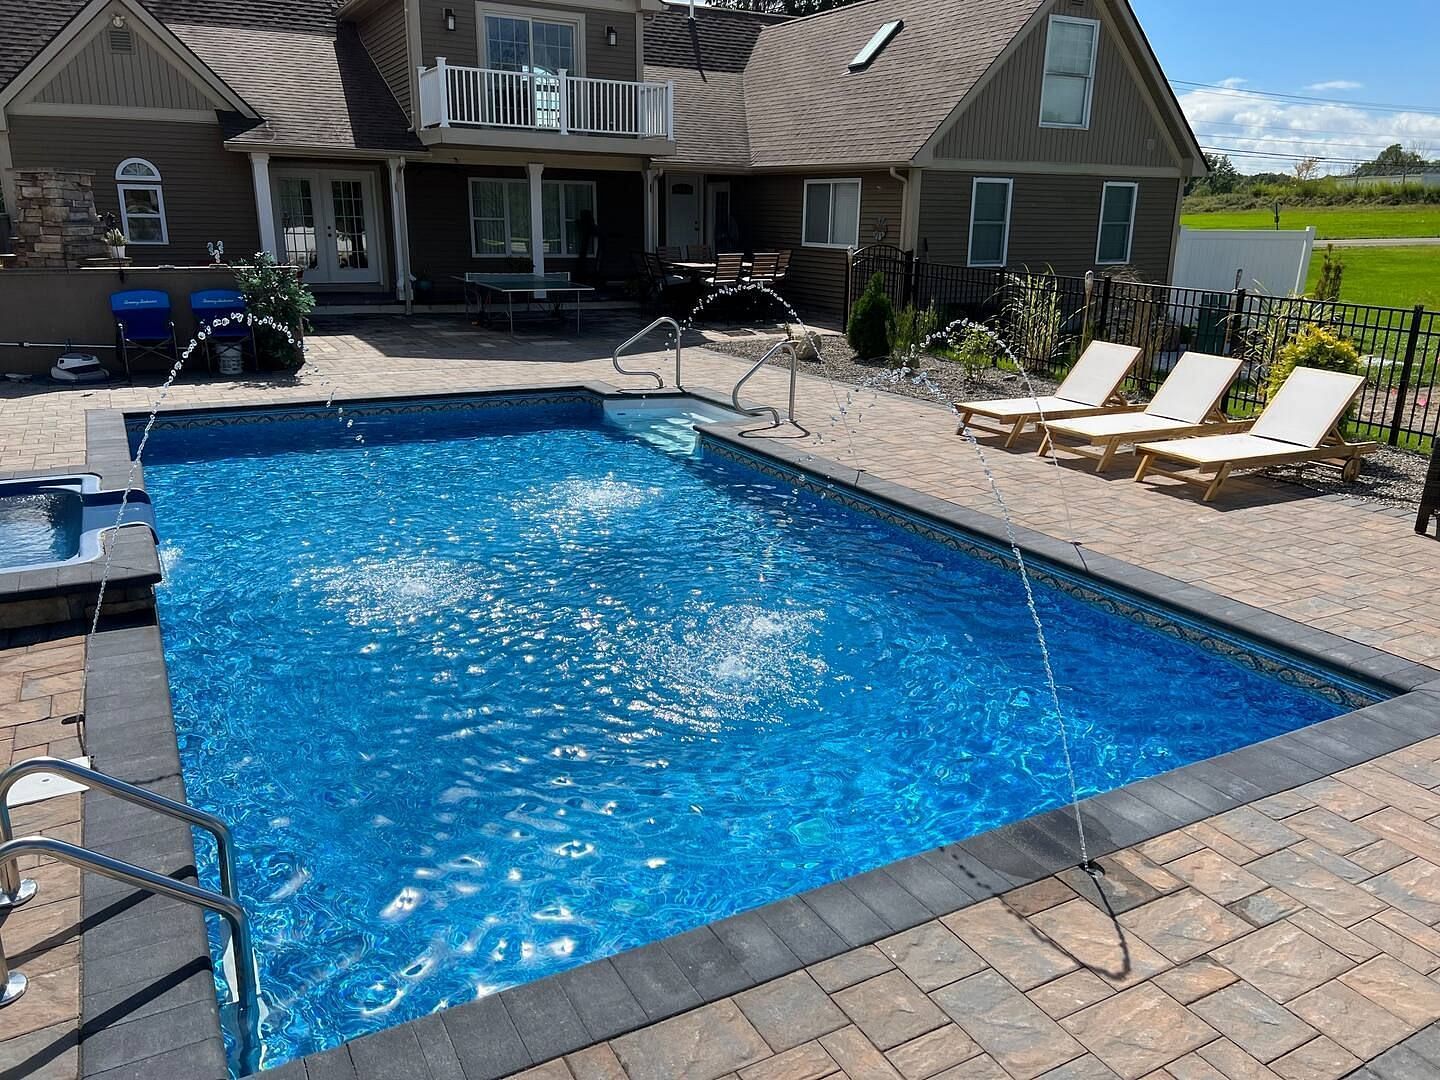 JWguest Villa at Wallkill, New York | Resort style house with pool - 5min from bethel | Jwbnb no brobnb 37